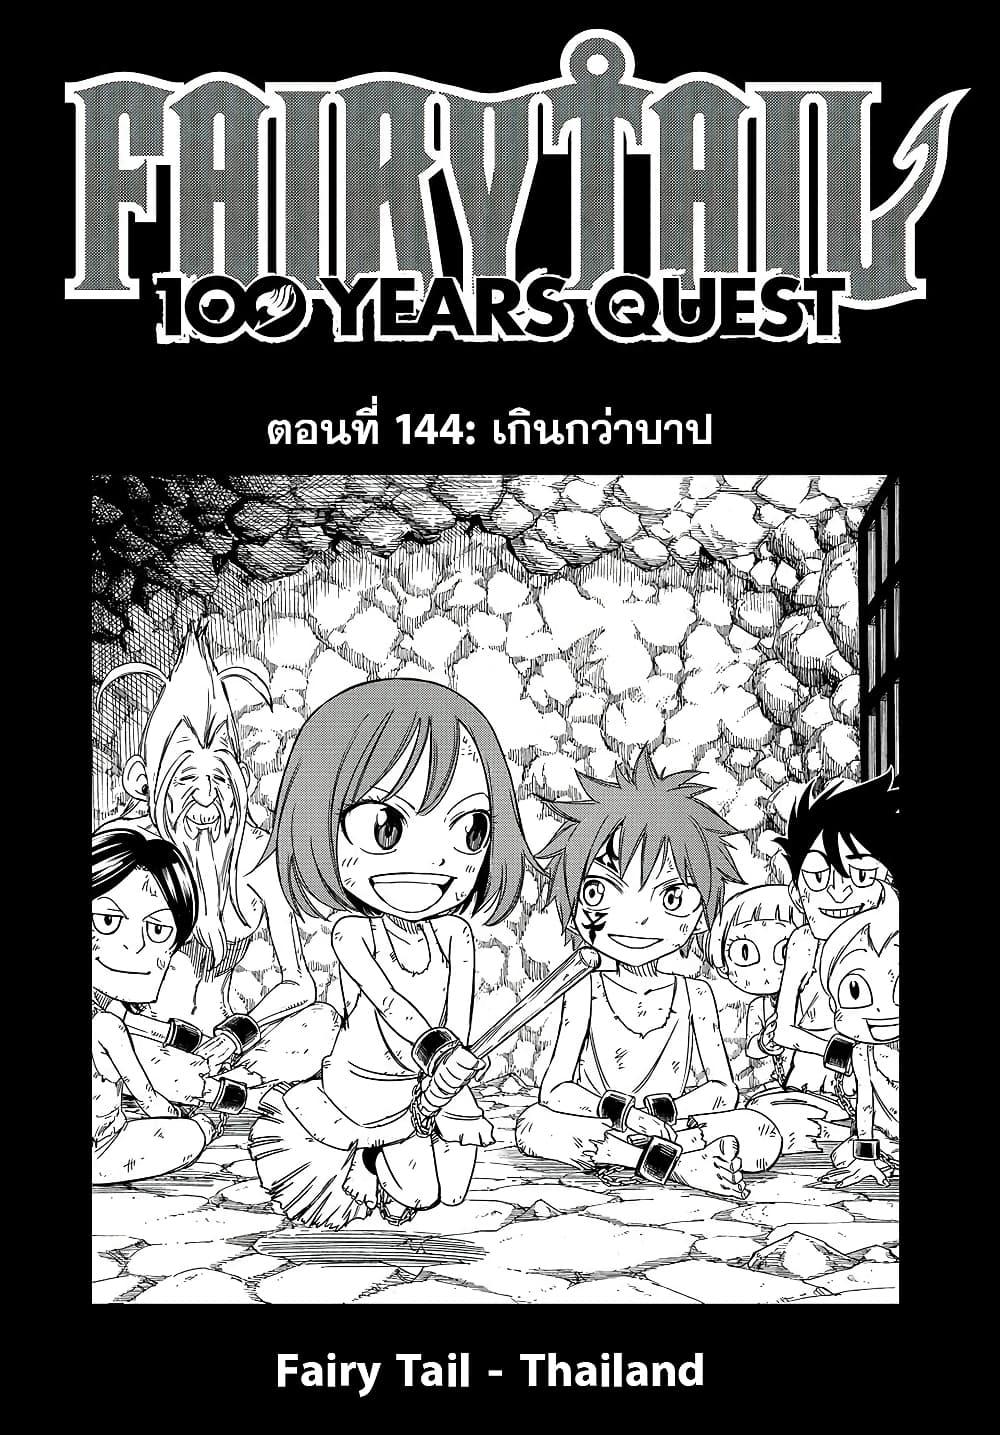 Fairy Tail 100 Years Quest ตอนที่ 144 (1)